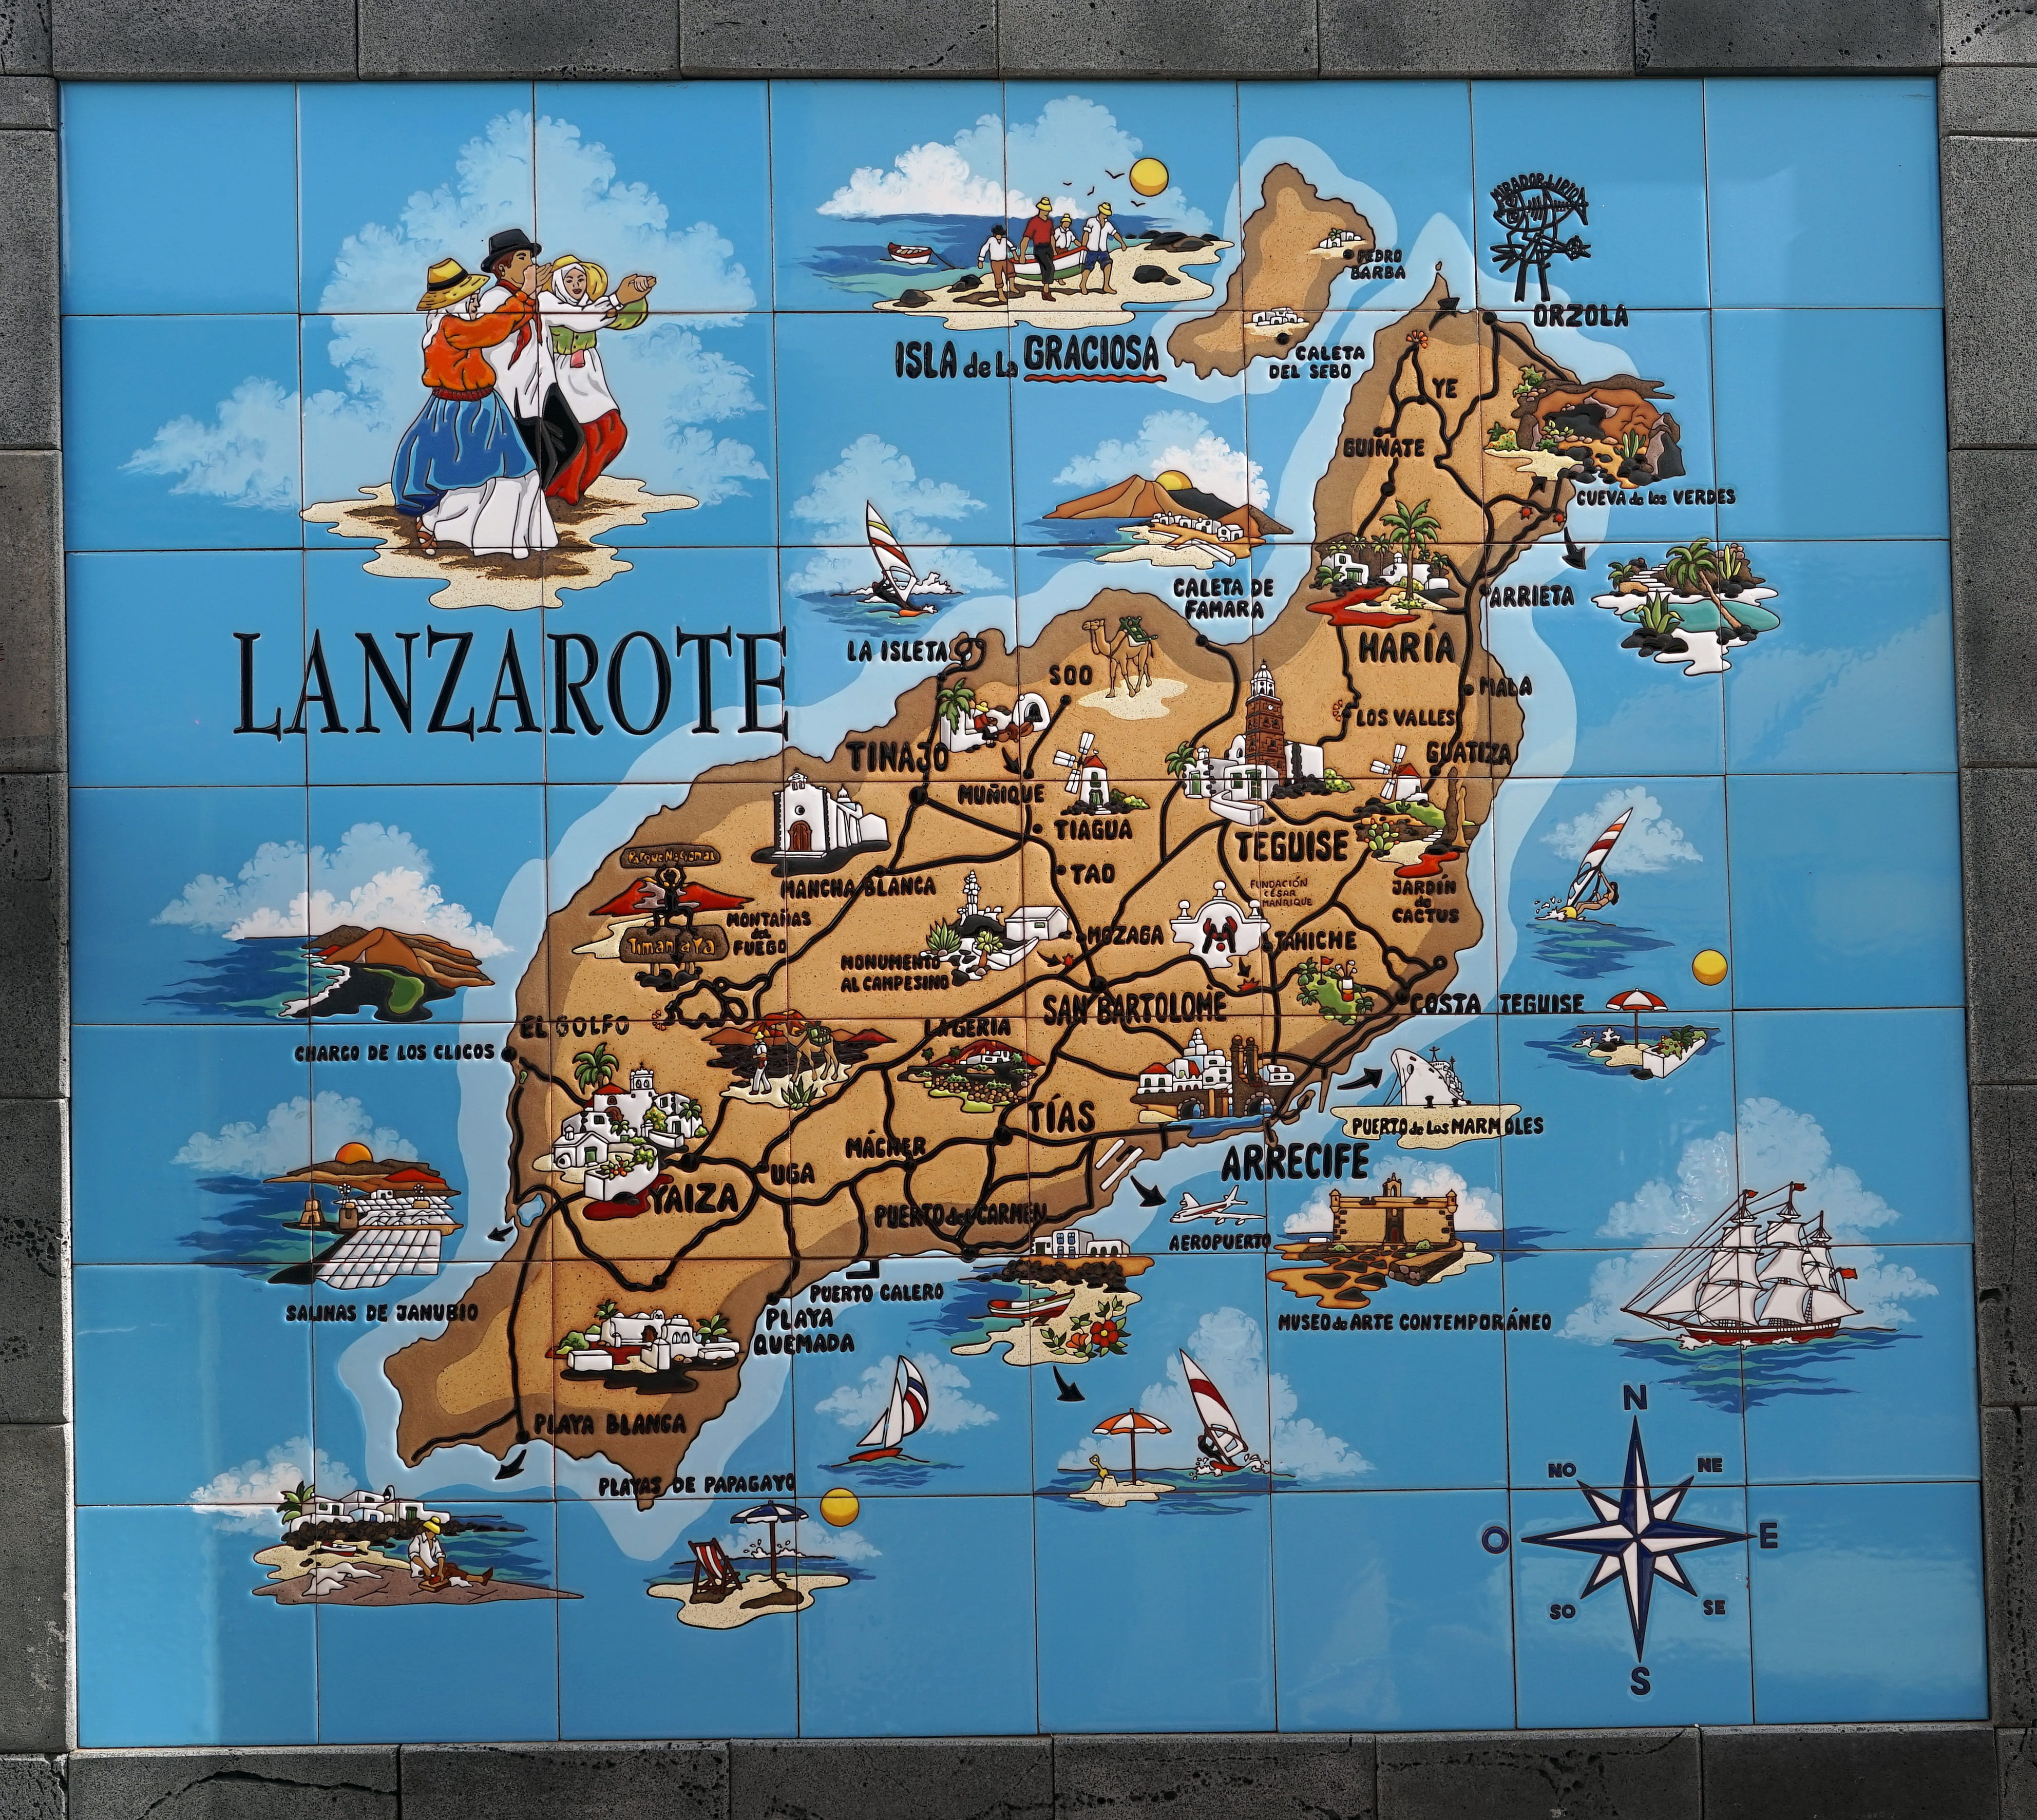 map, lanzarote, colorful, canary island, spain, canary islands